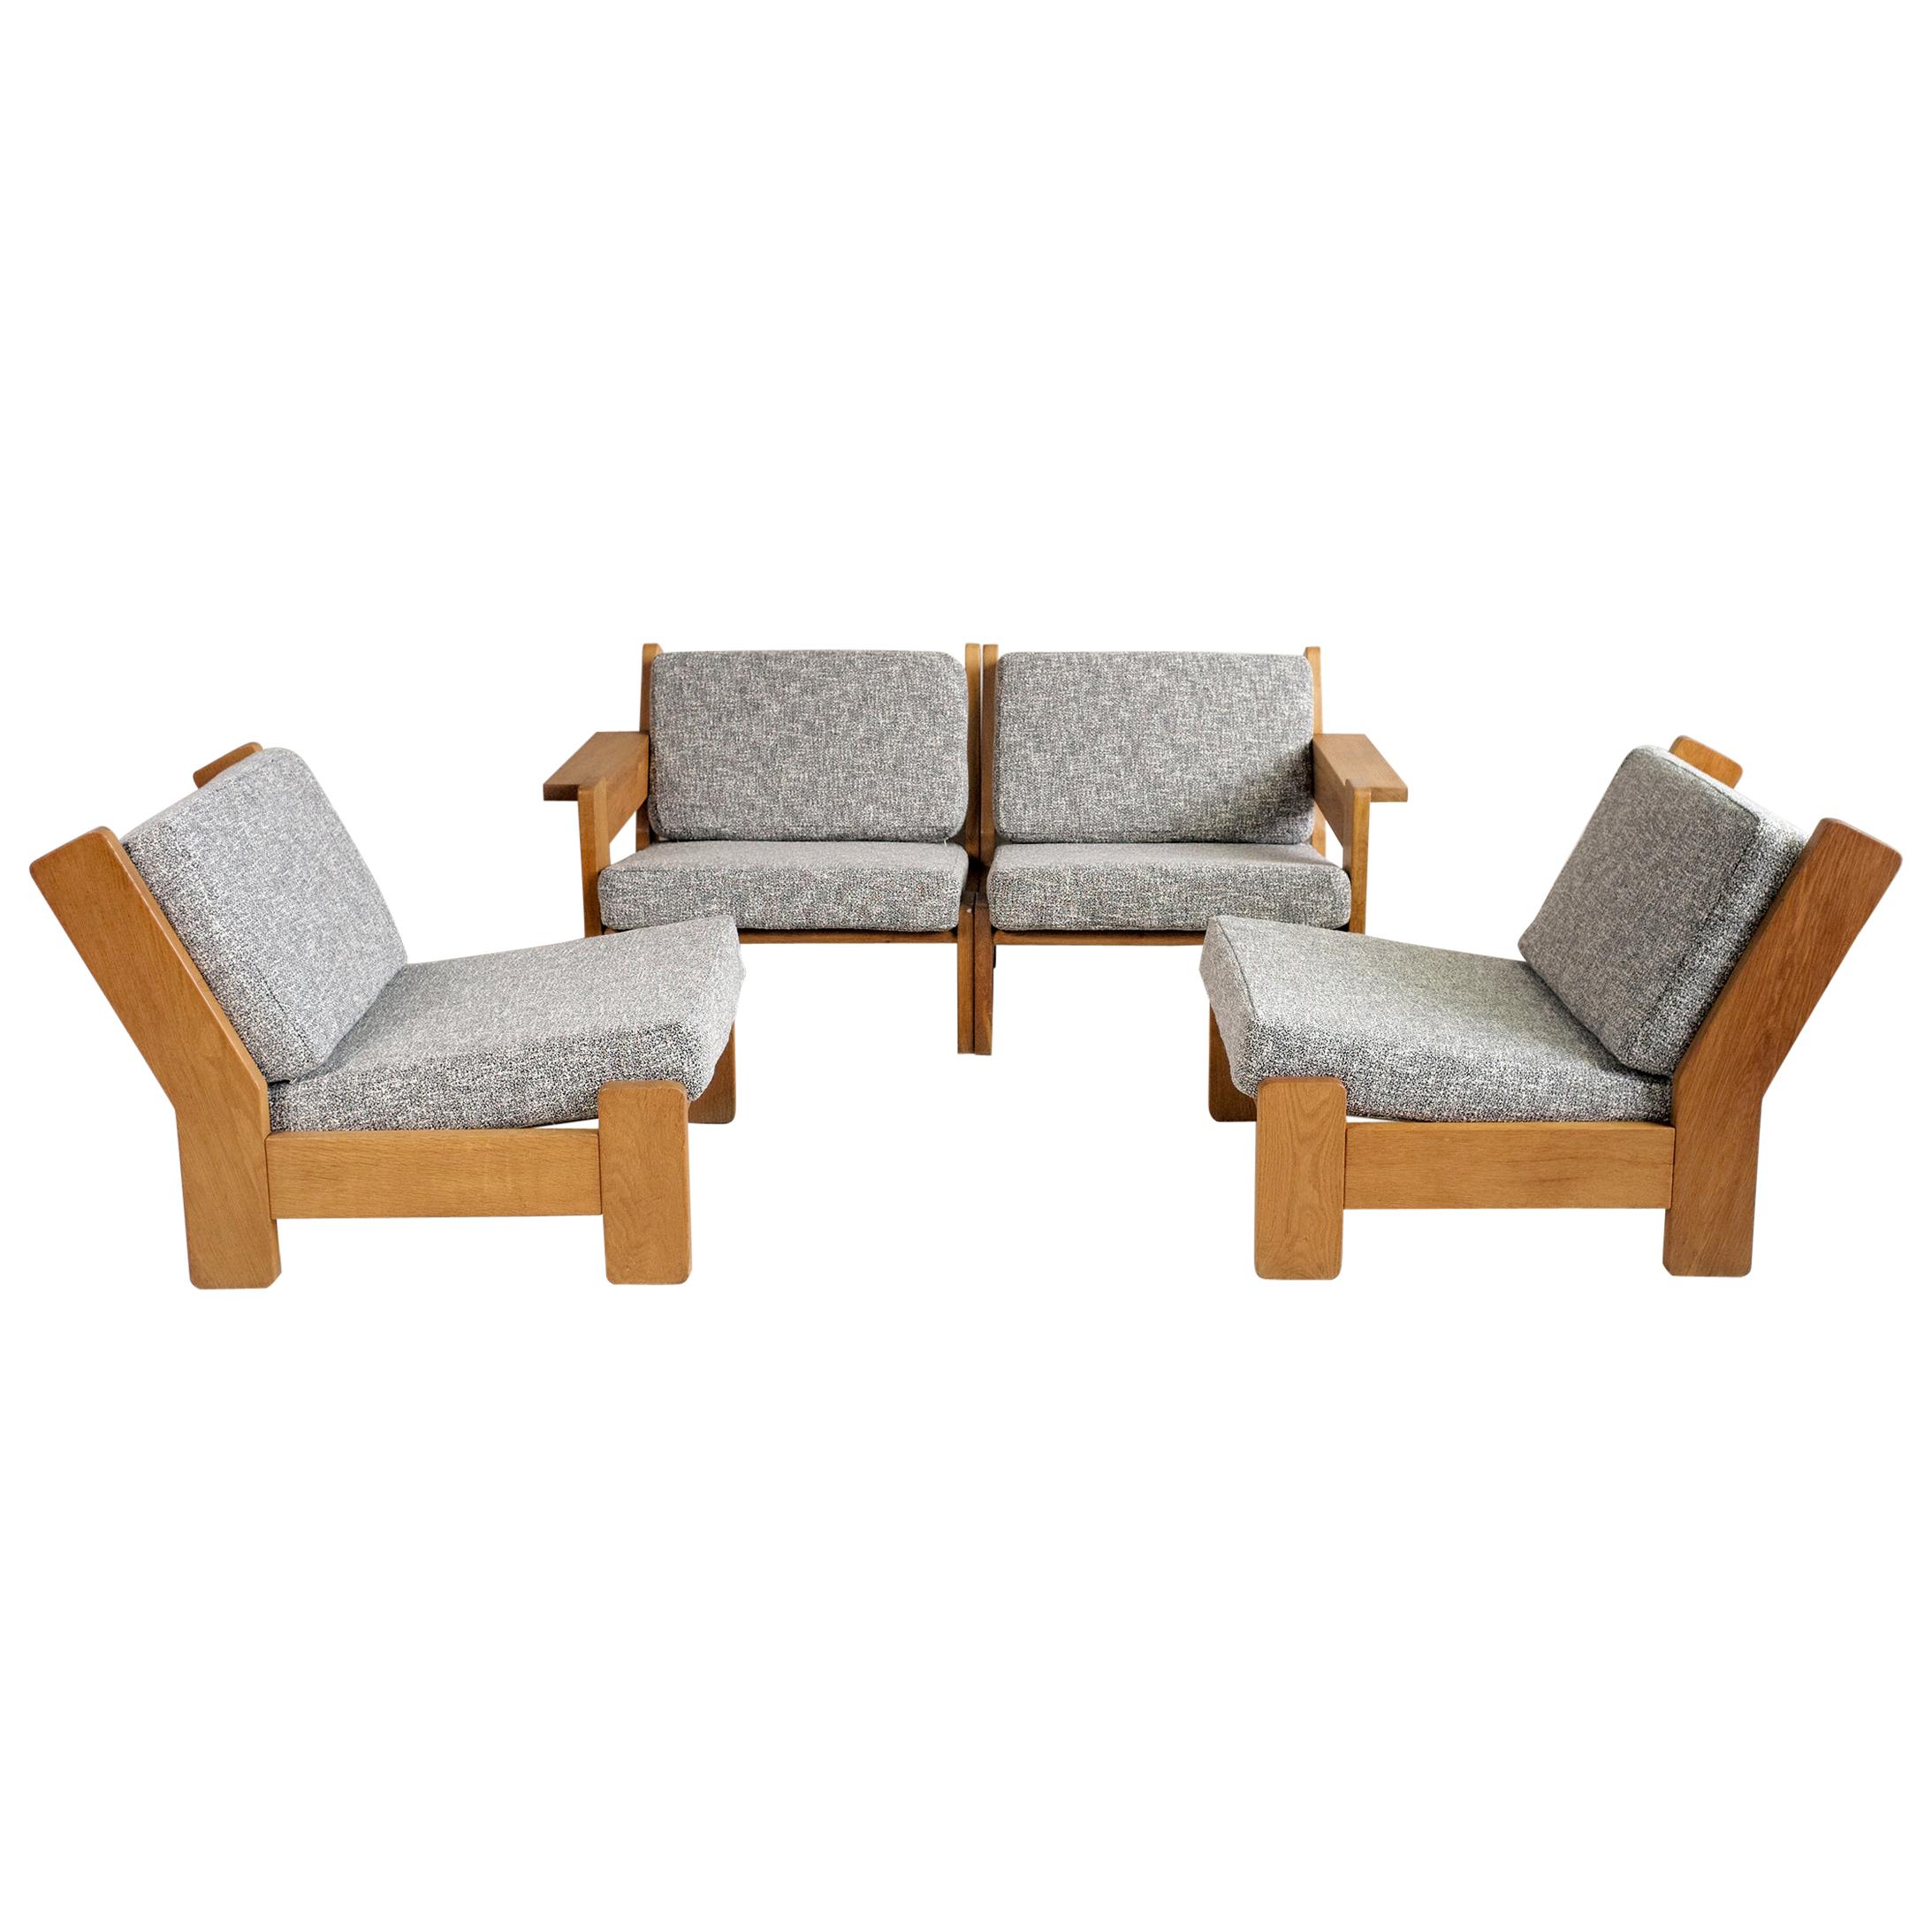 Modular Sectional Sofa in Blond Oak and Fabric, Northern Europe 1960